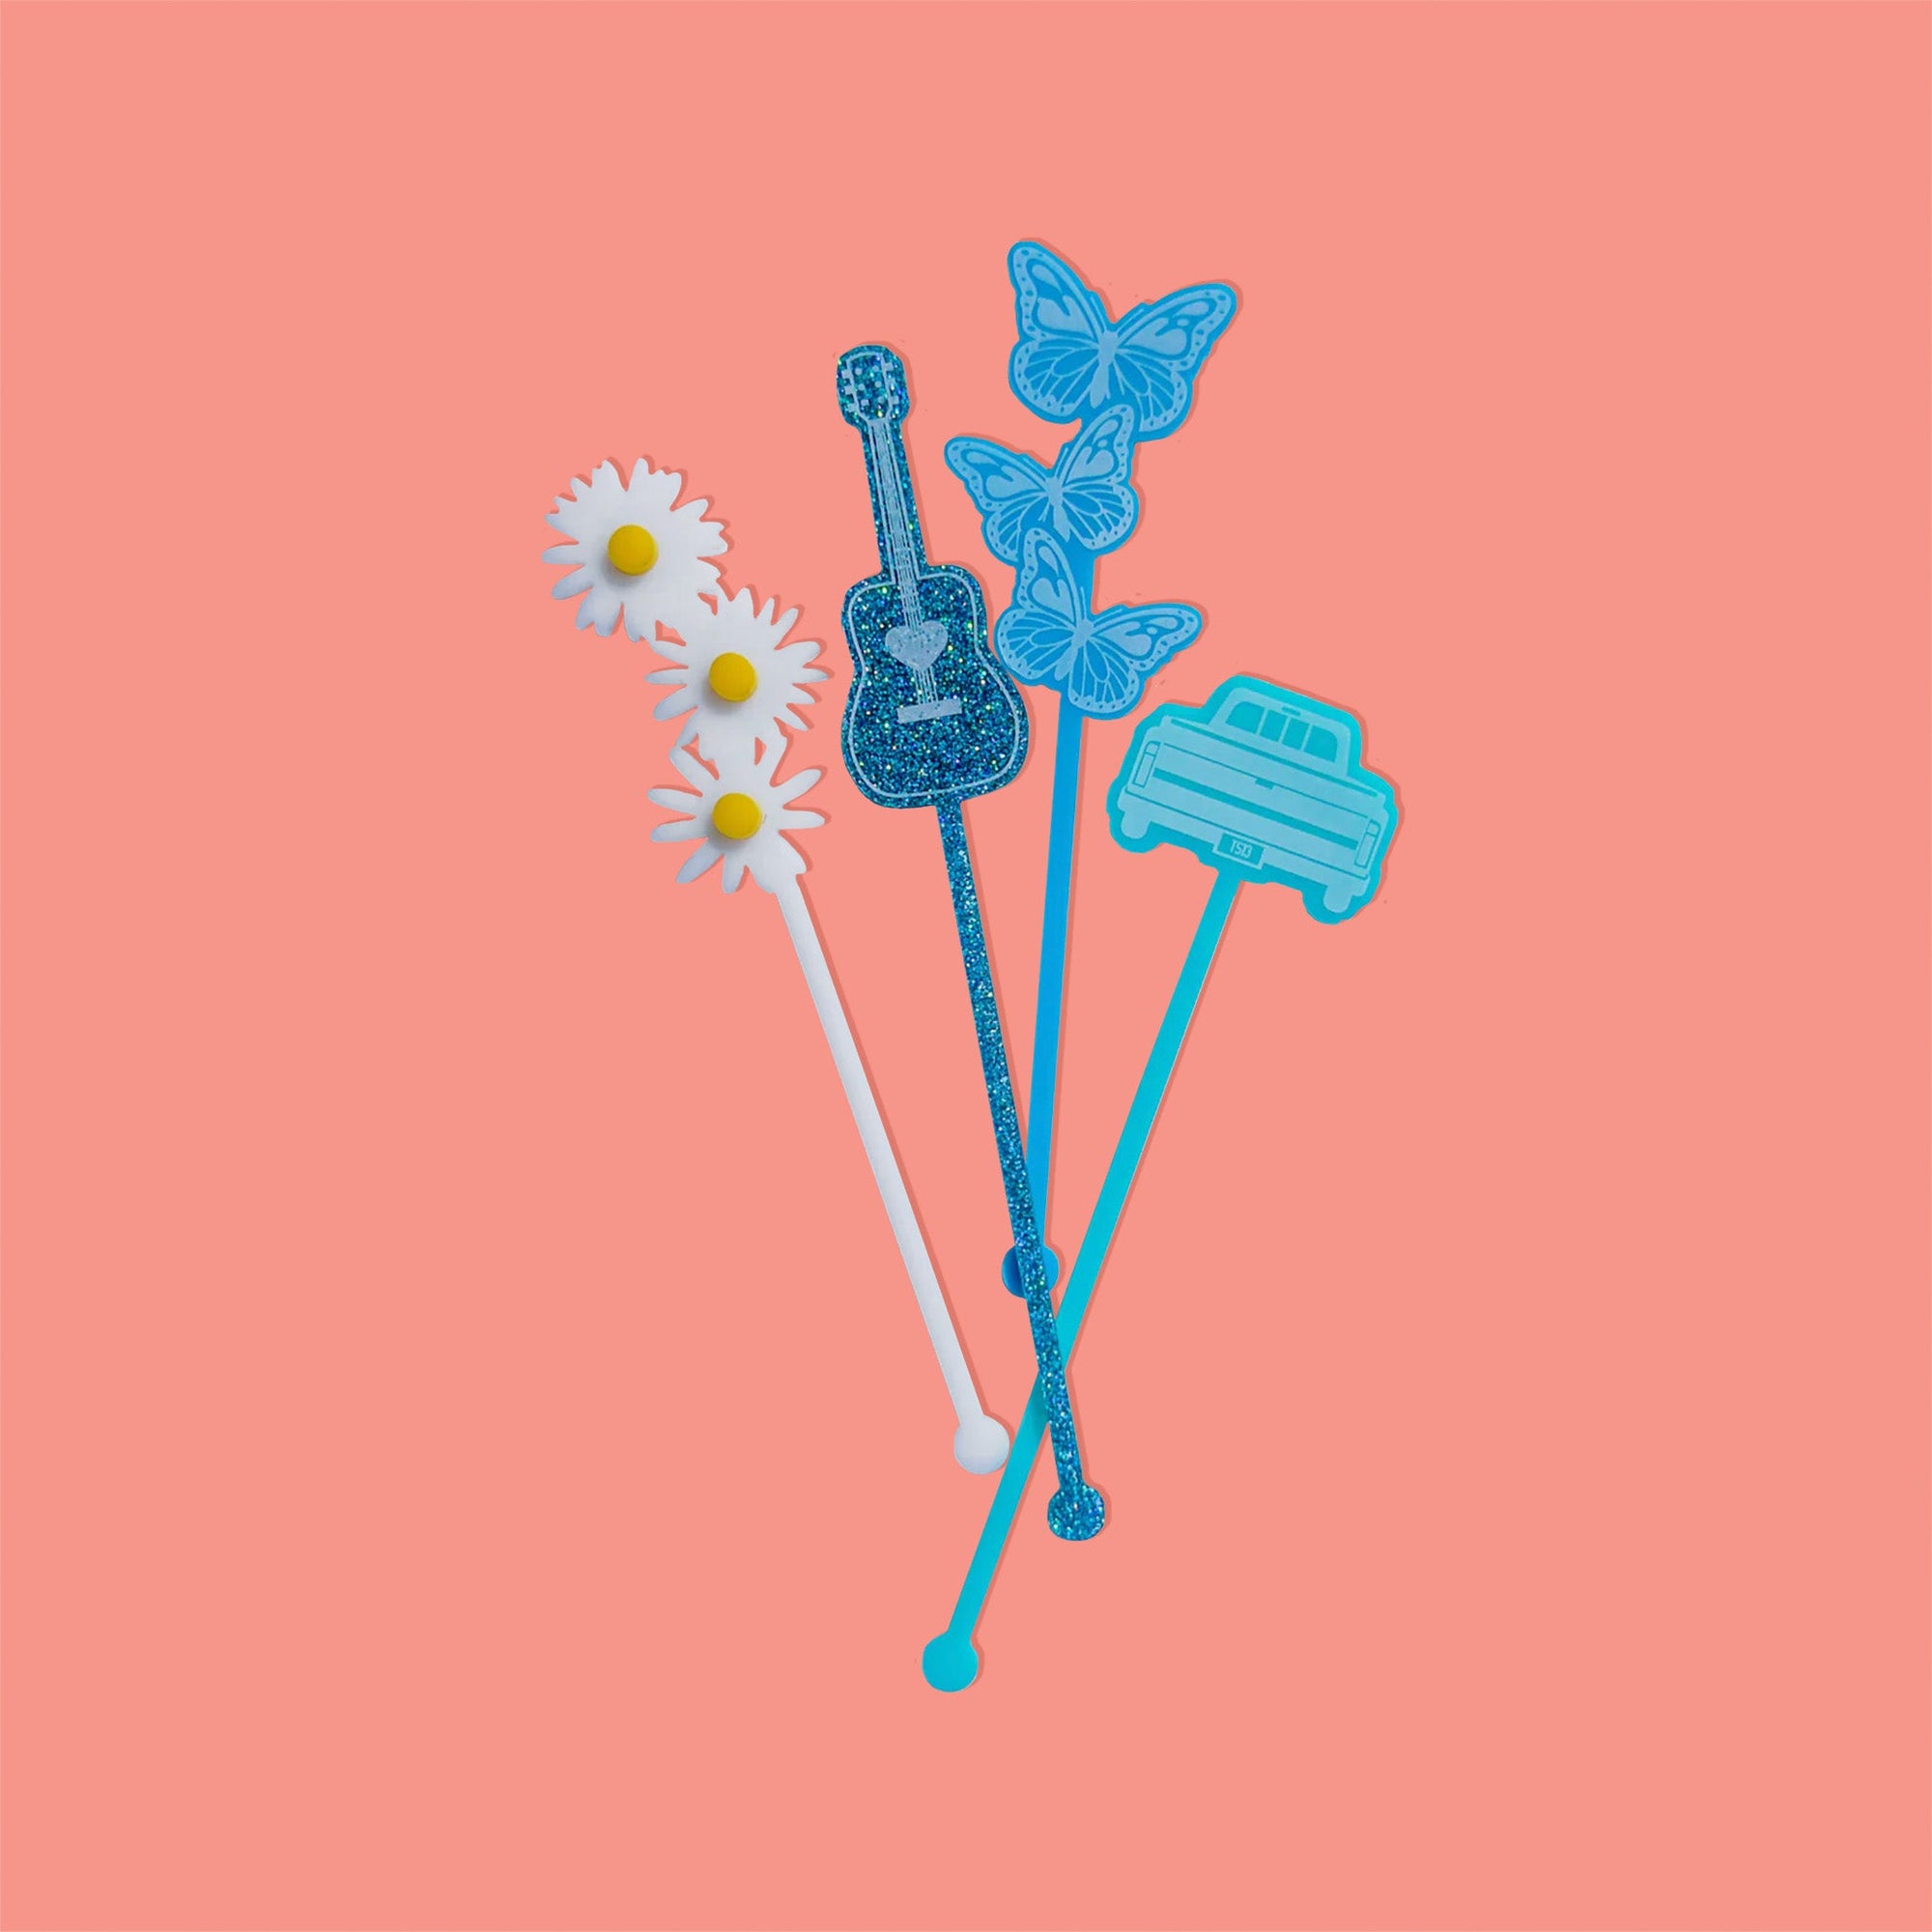 On a coral pink background sits acrylic stirrers. This Taylor Swift inspired set of 4 stirrers includes a white with yellow opaque daisies, a teal glitter acoustic guitar, a trio of laguna opague butterflies, and a turquoise opaque pickup truck.